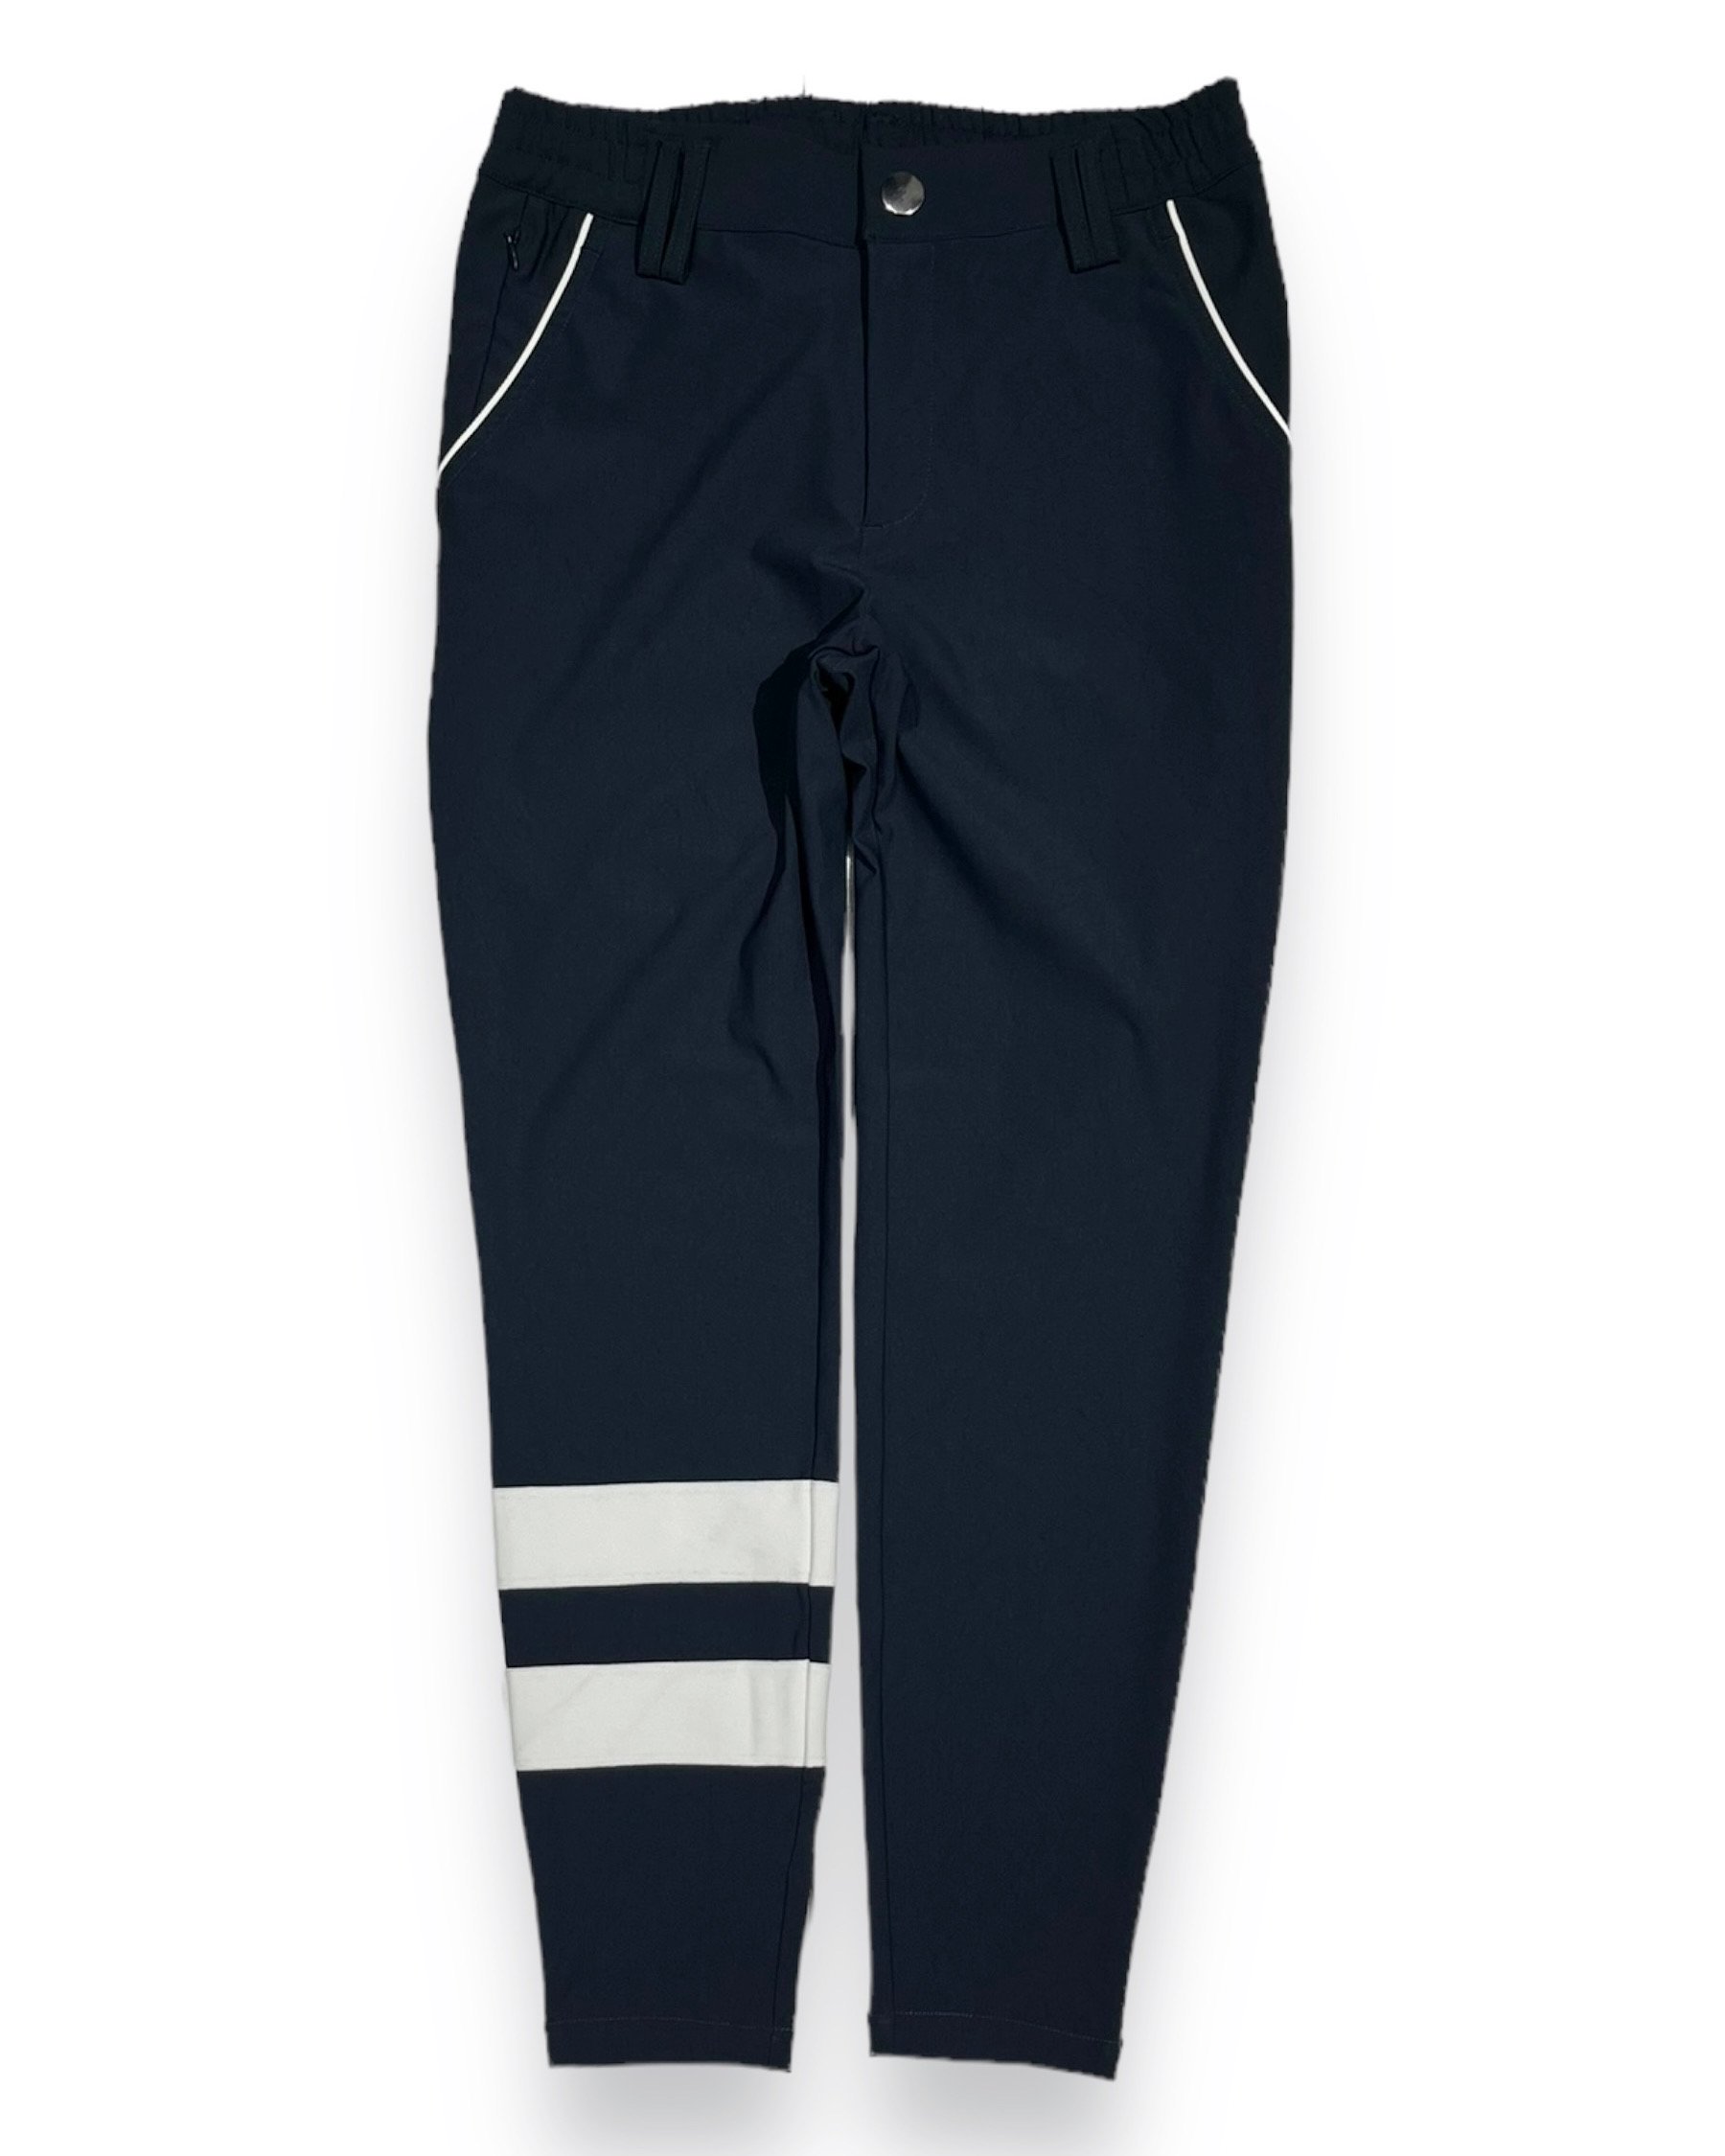 <img class='new_mark_img1' src='https://img.shop-pro.jp/img/new/icons5.gif' style='border:none;display:inline;margin:0px;padding:0px;width:auto;' />New Arrival !Sheltering dry & cool pants / MEN
